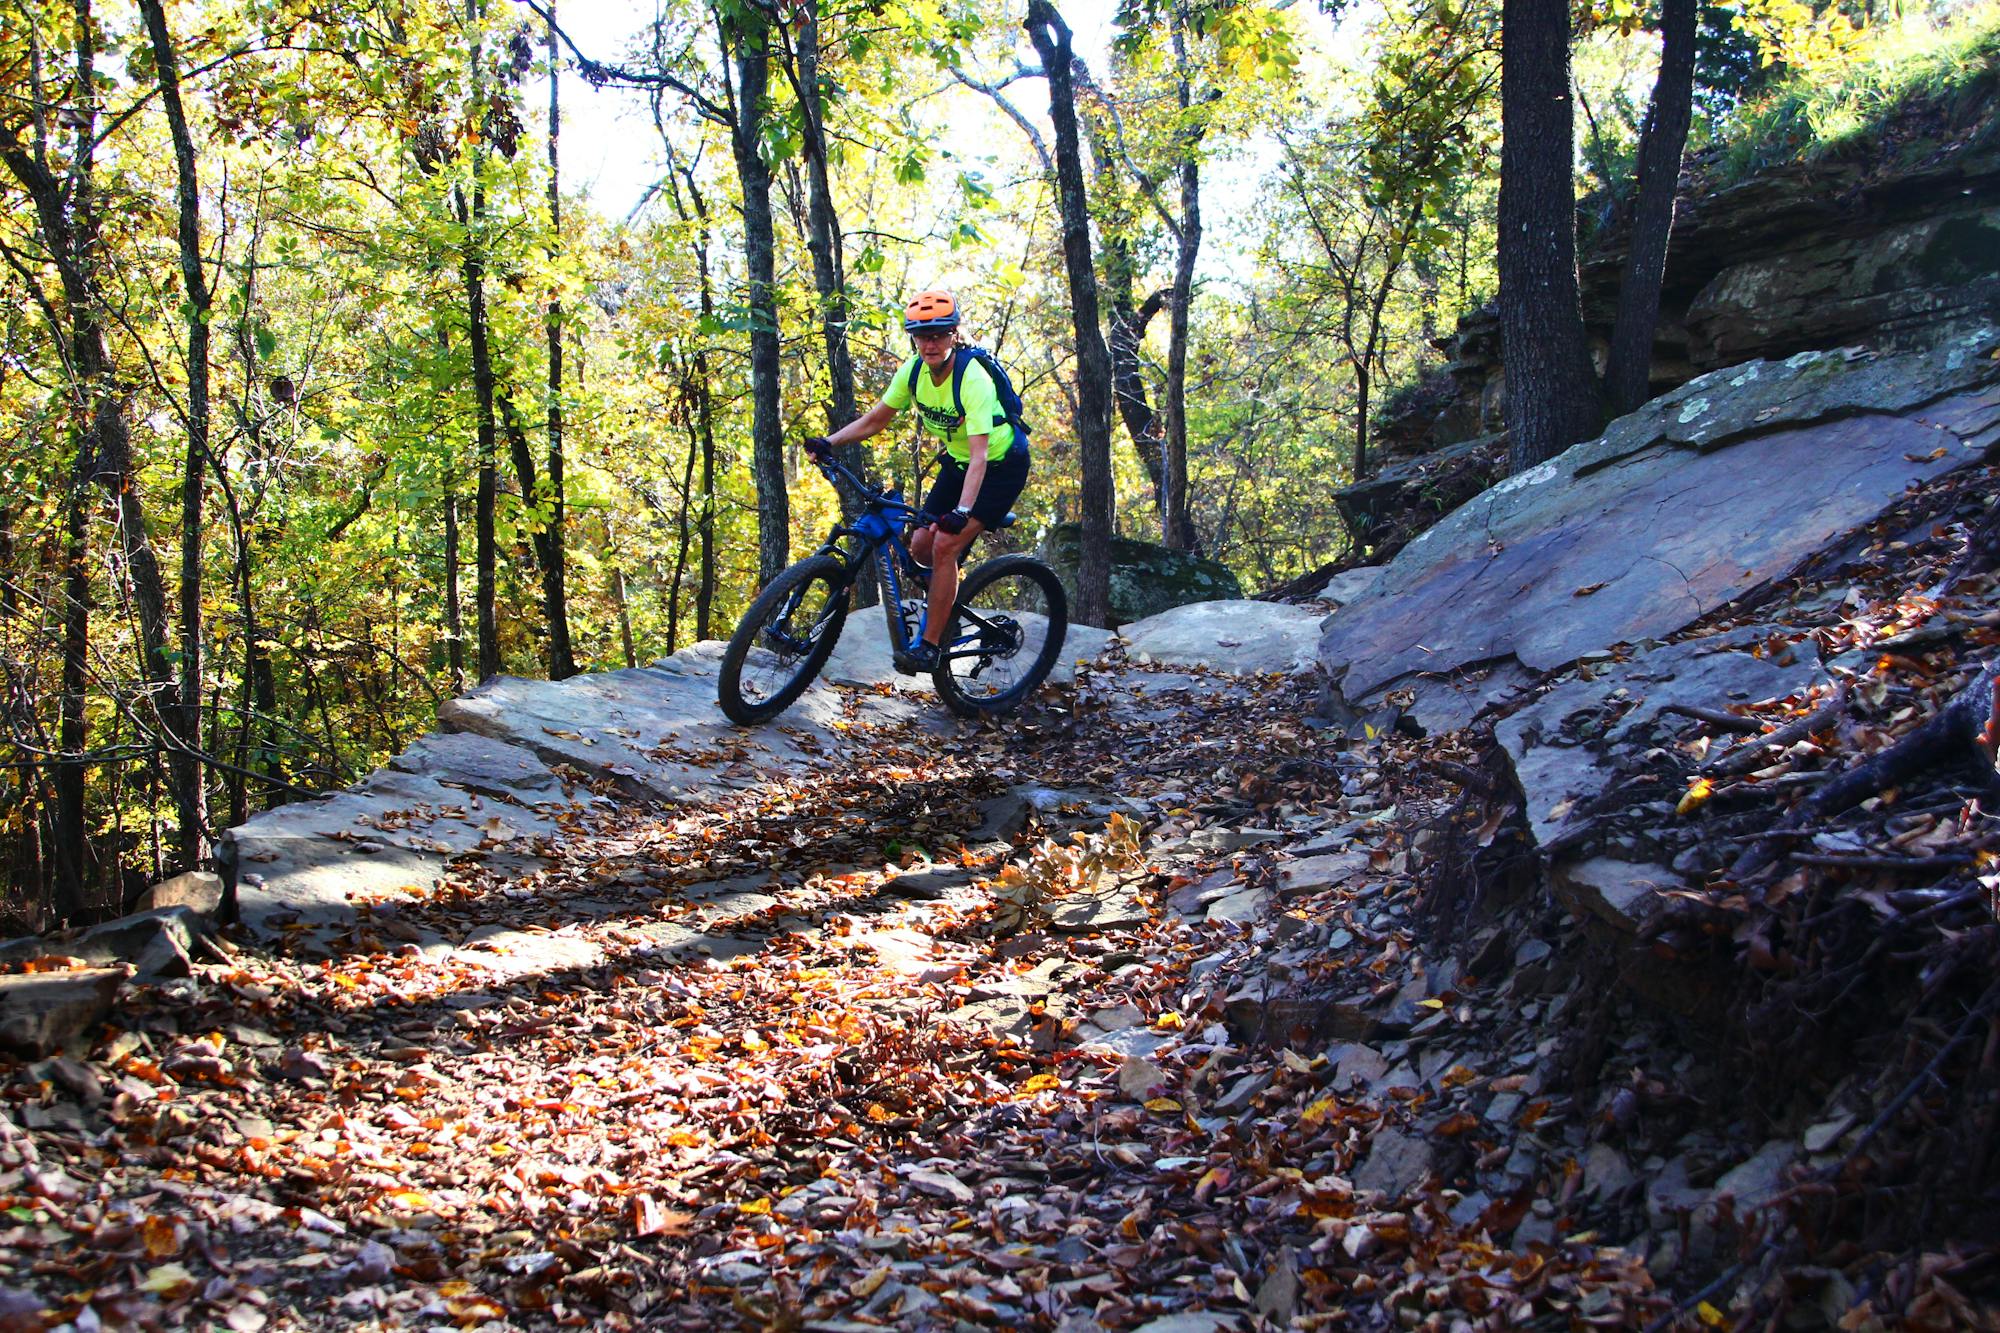 Some of the nice rock slab Rogue Trails is known for.